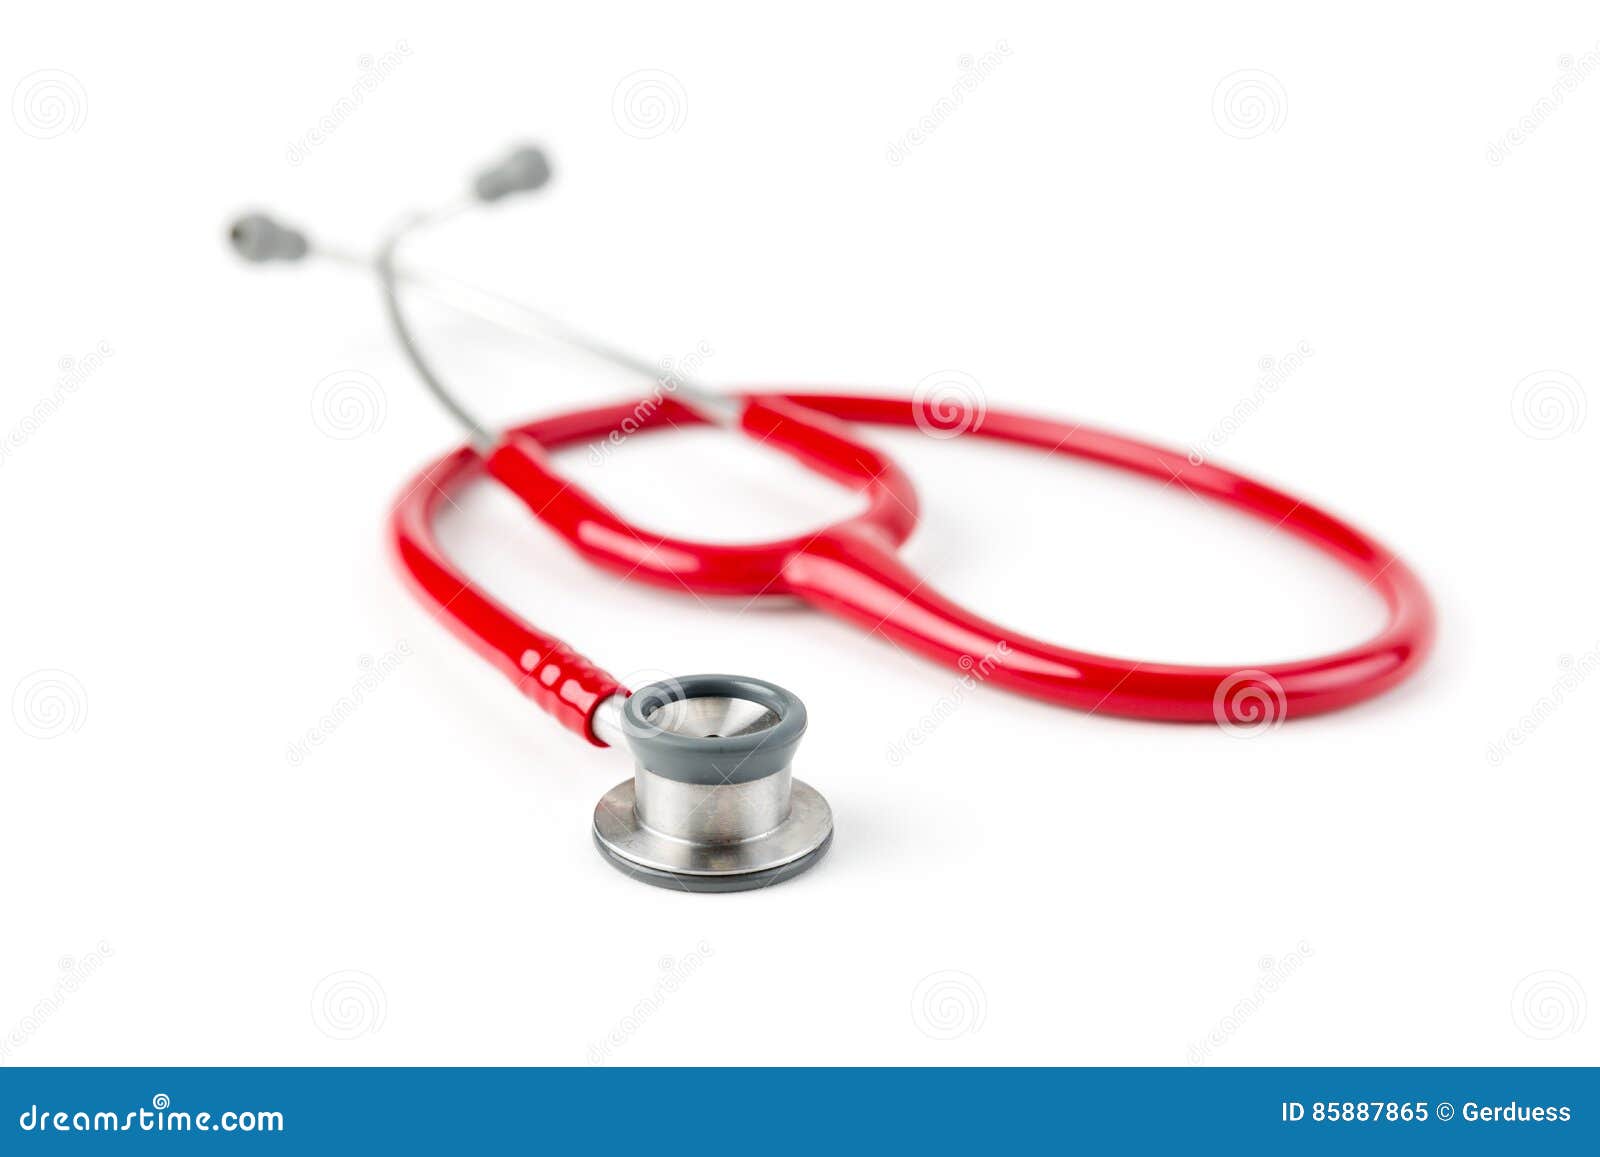 red medical stetoskop  on a white background. studio shot. front view. shallow depth of field.